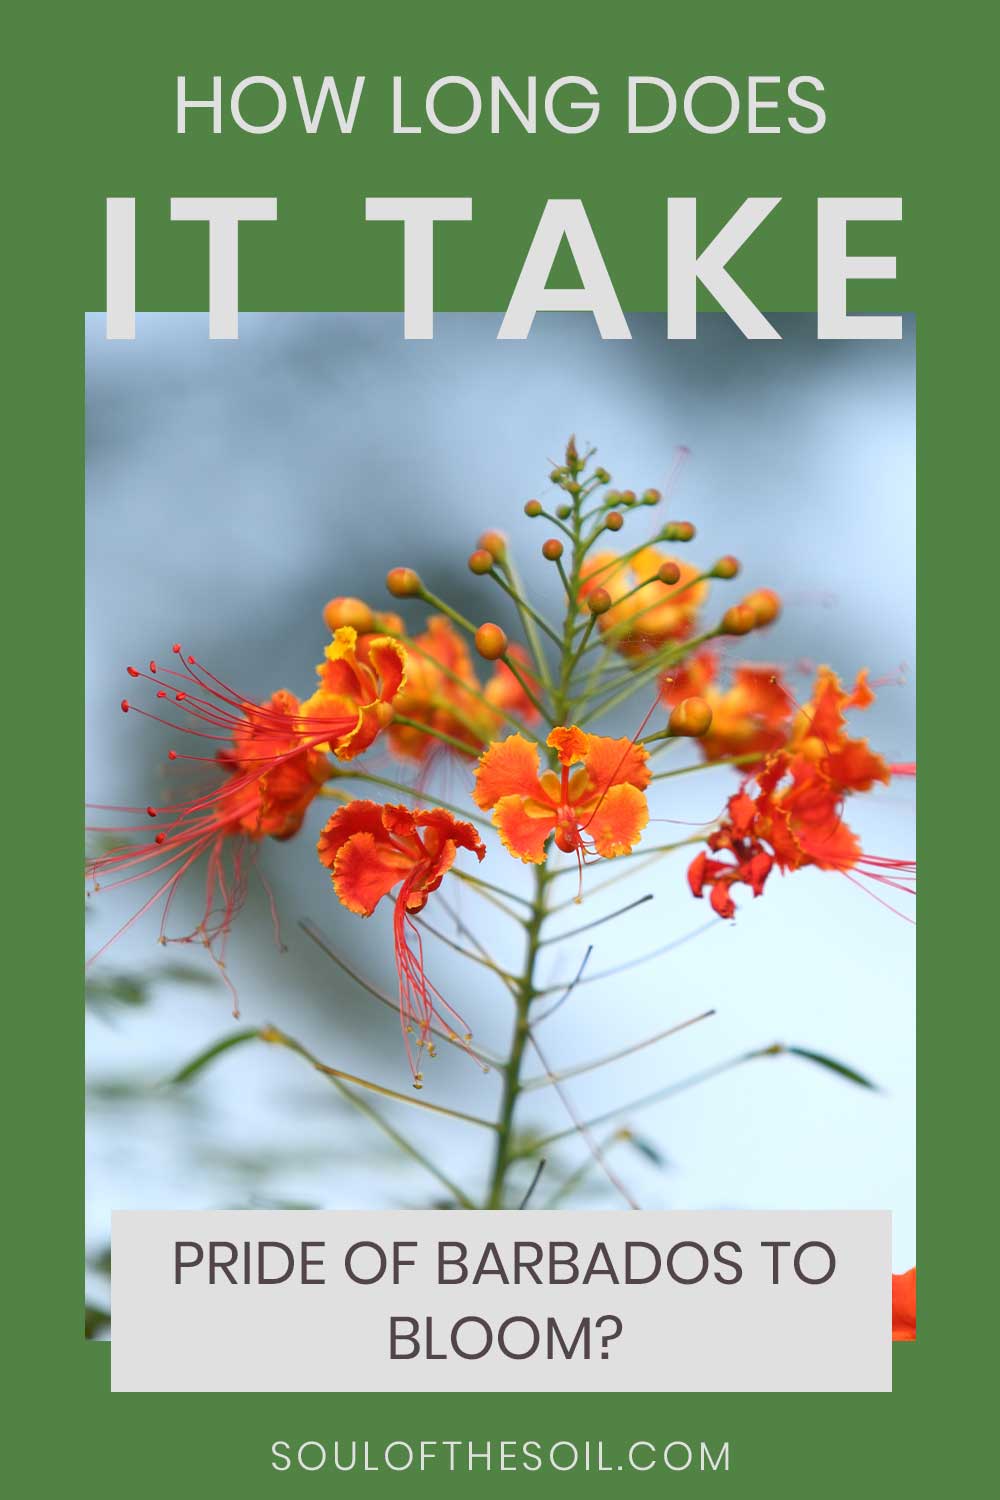 How Long Does It Take Pride Of Barbados To Bloom?